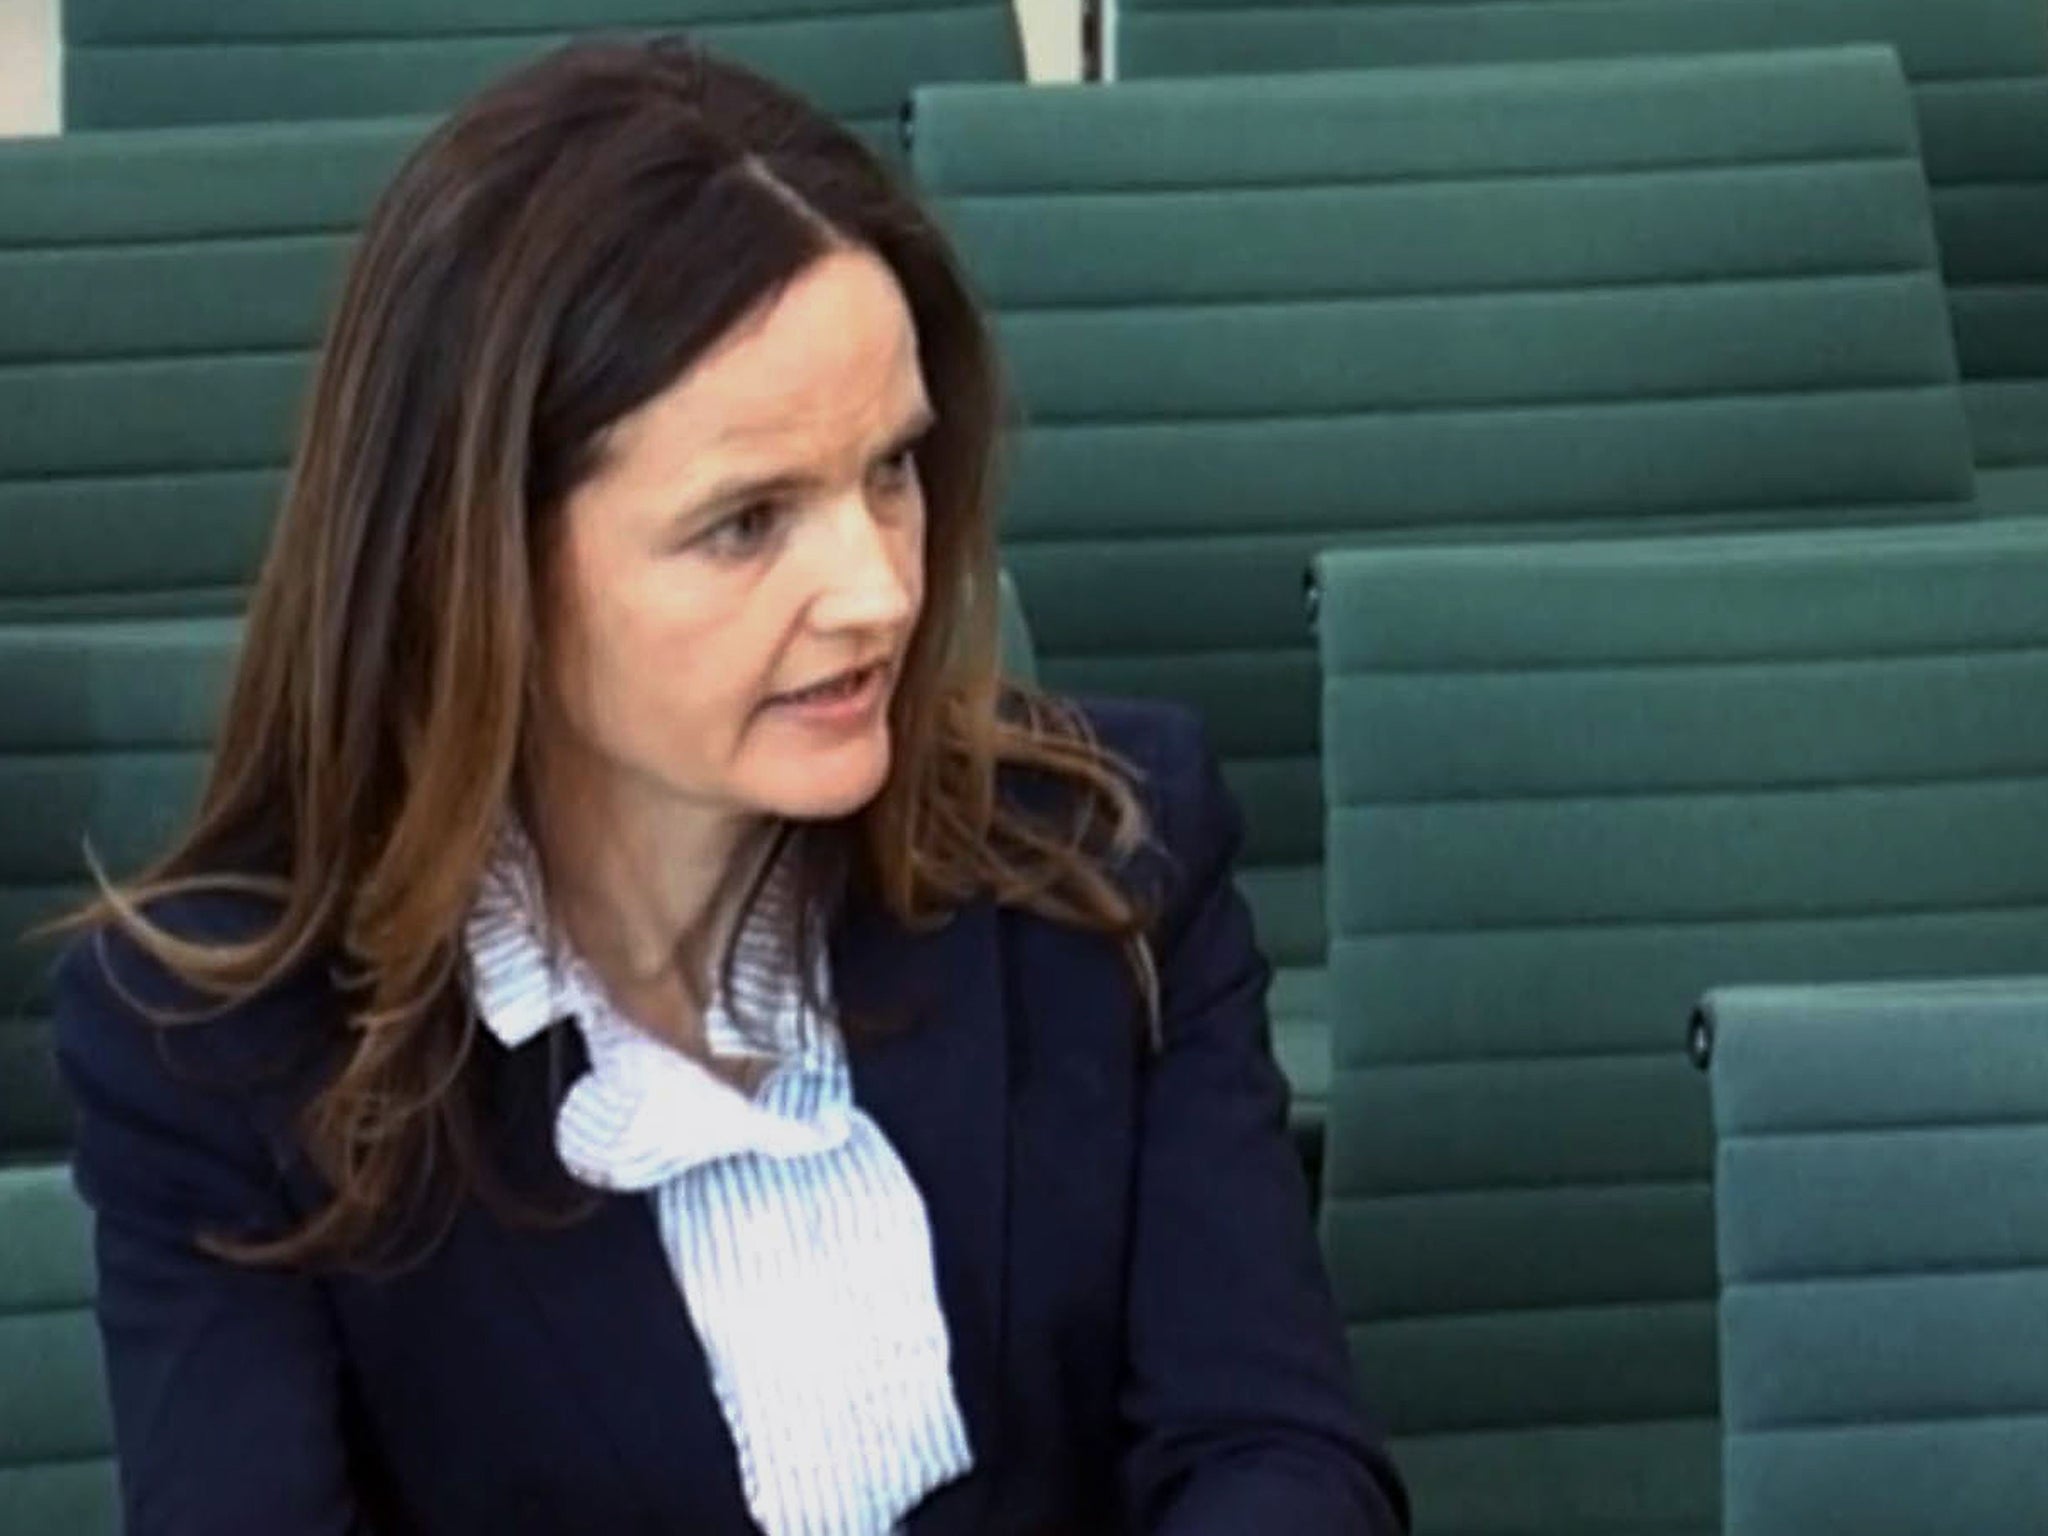 Bank of England deputy governor Charlotte Hogg at her meeting with the Treasury Select Committee last week